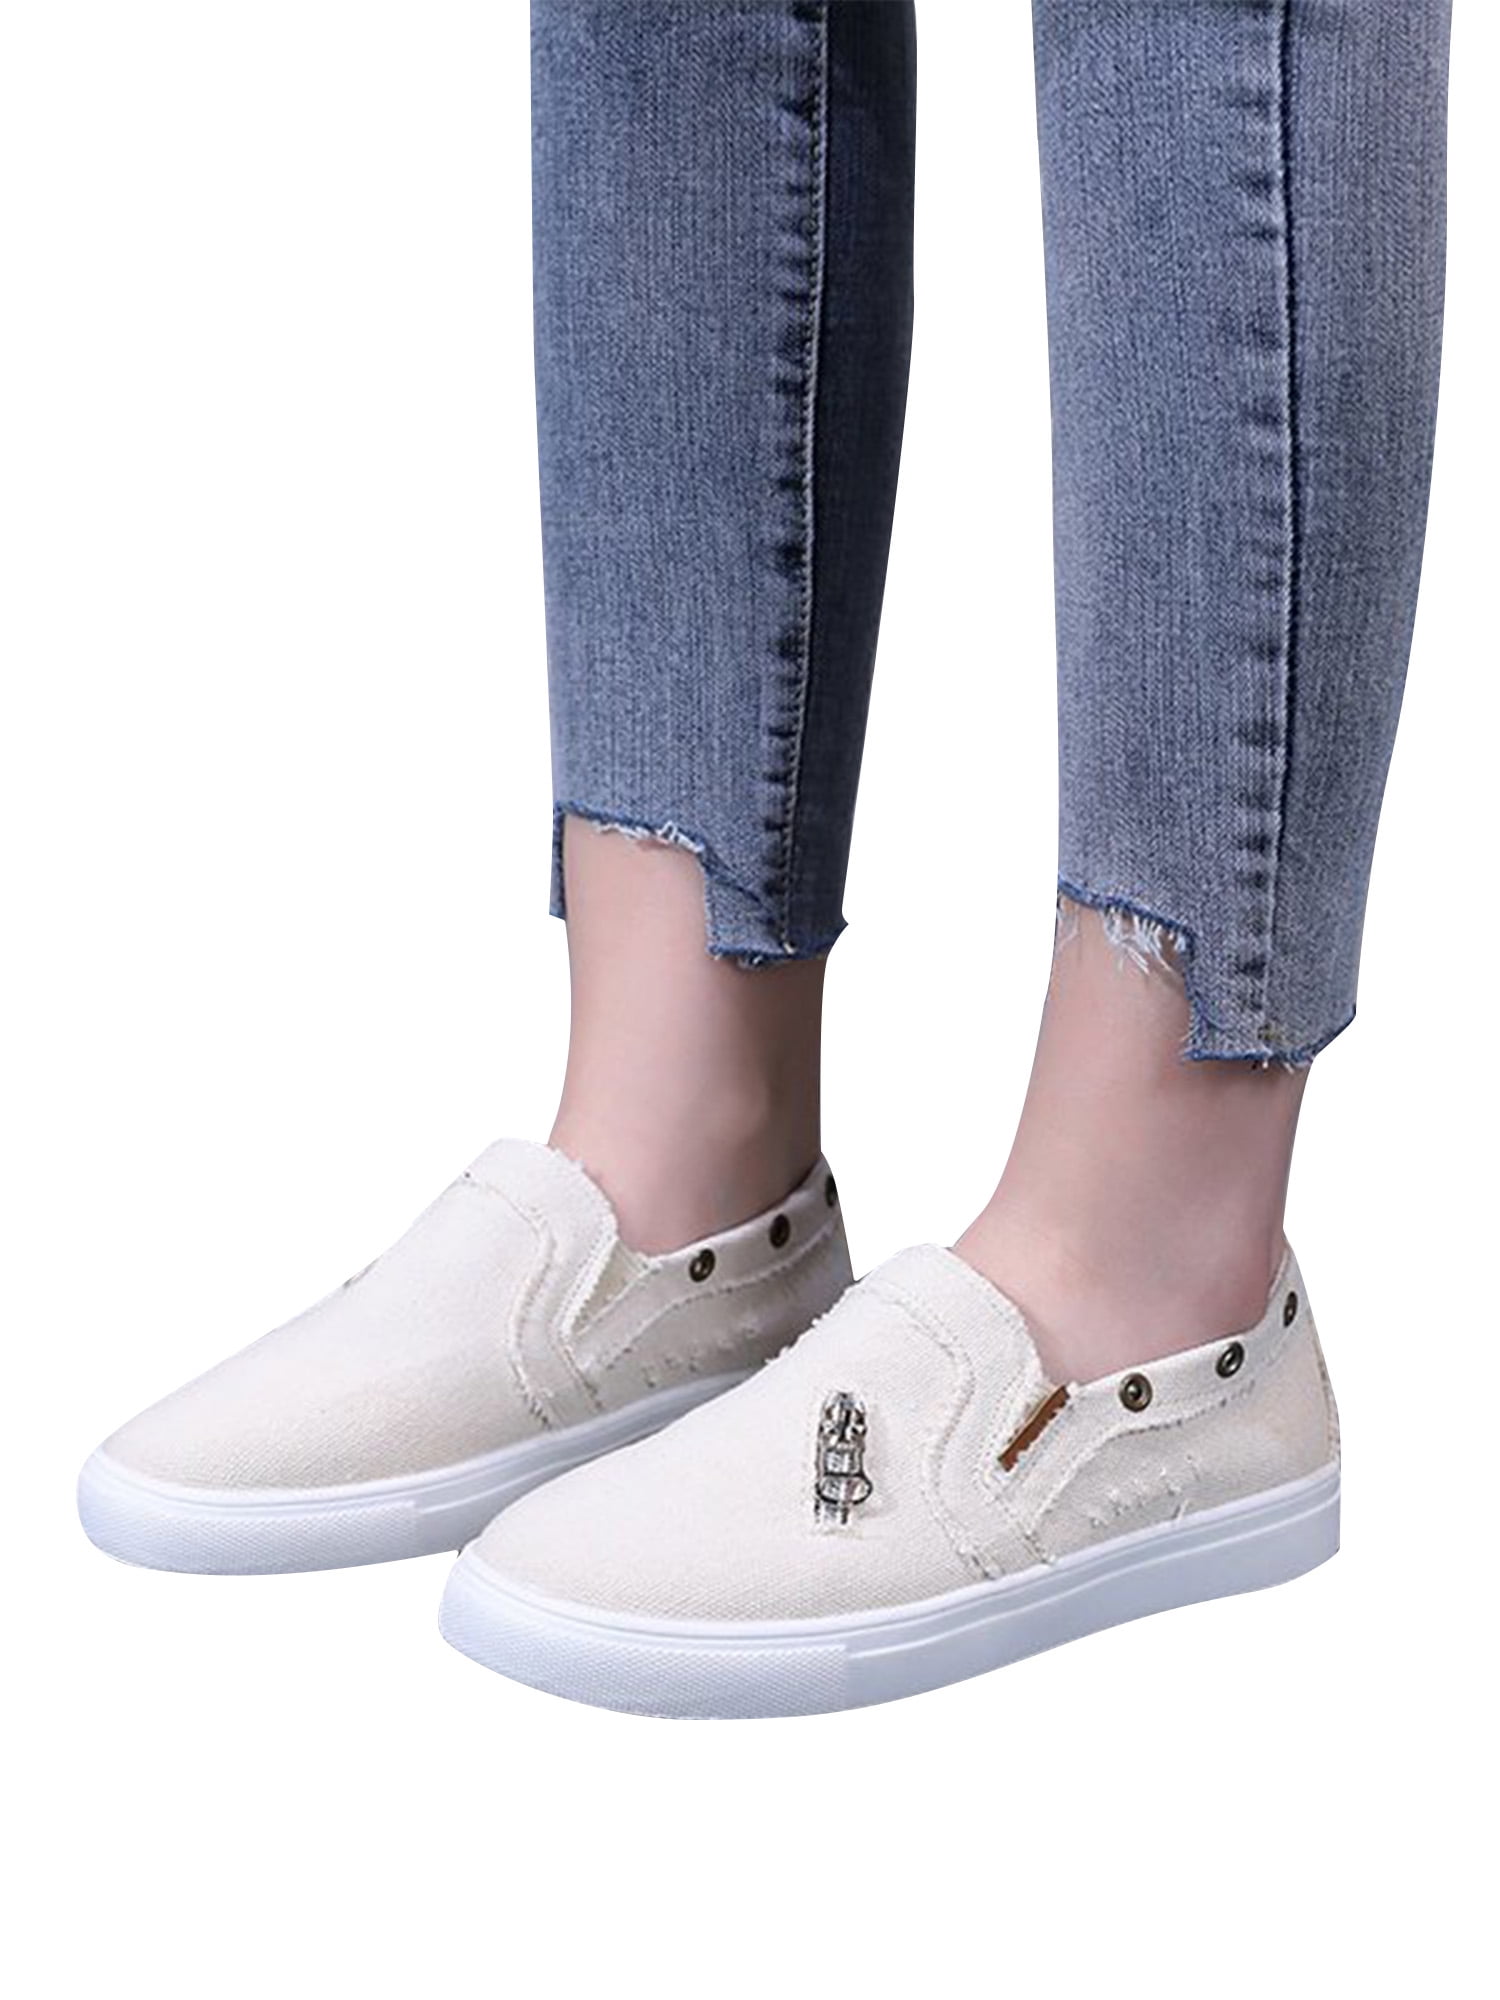 Denim Canvas Shoes Women Lace Up Casual Flat Embroidery Flower Sneakers  Shoes | eBay